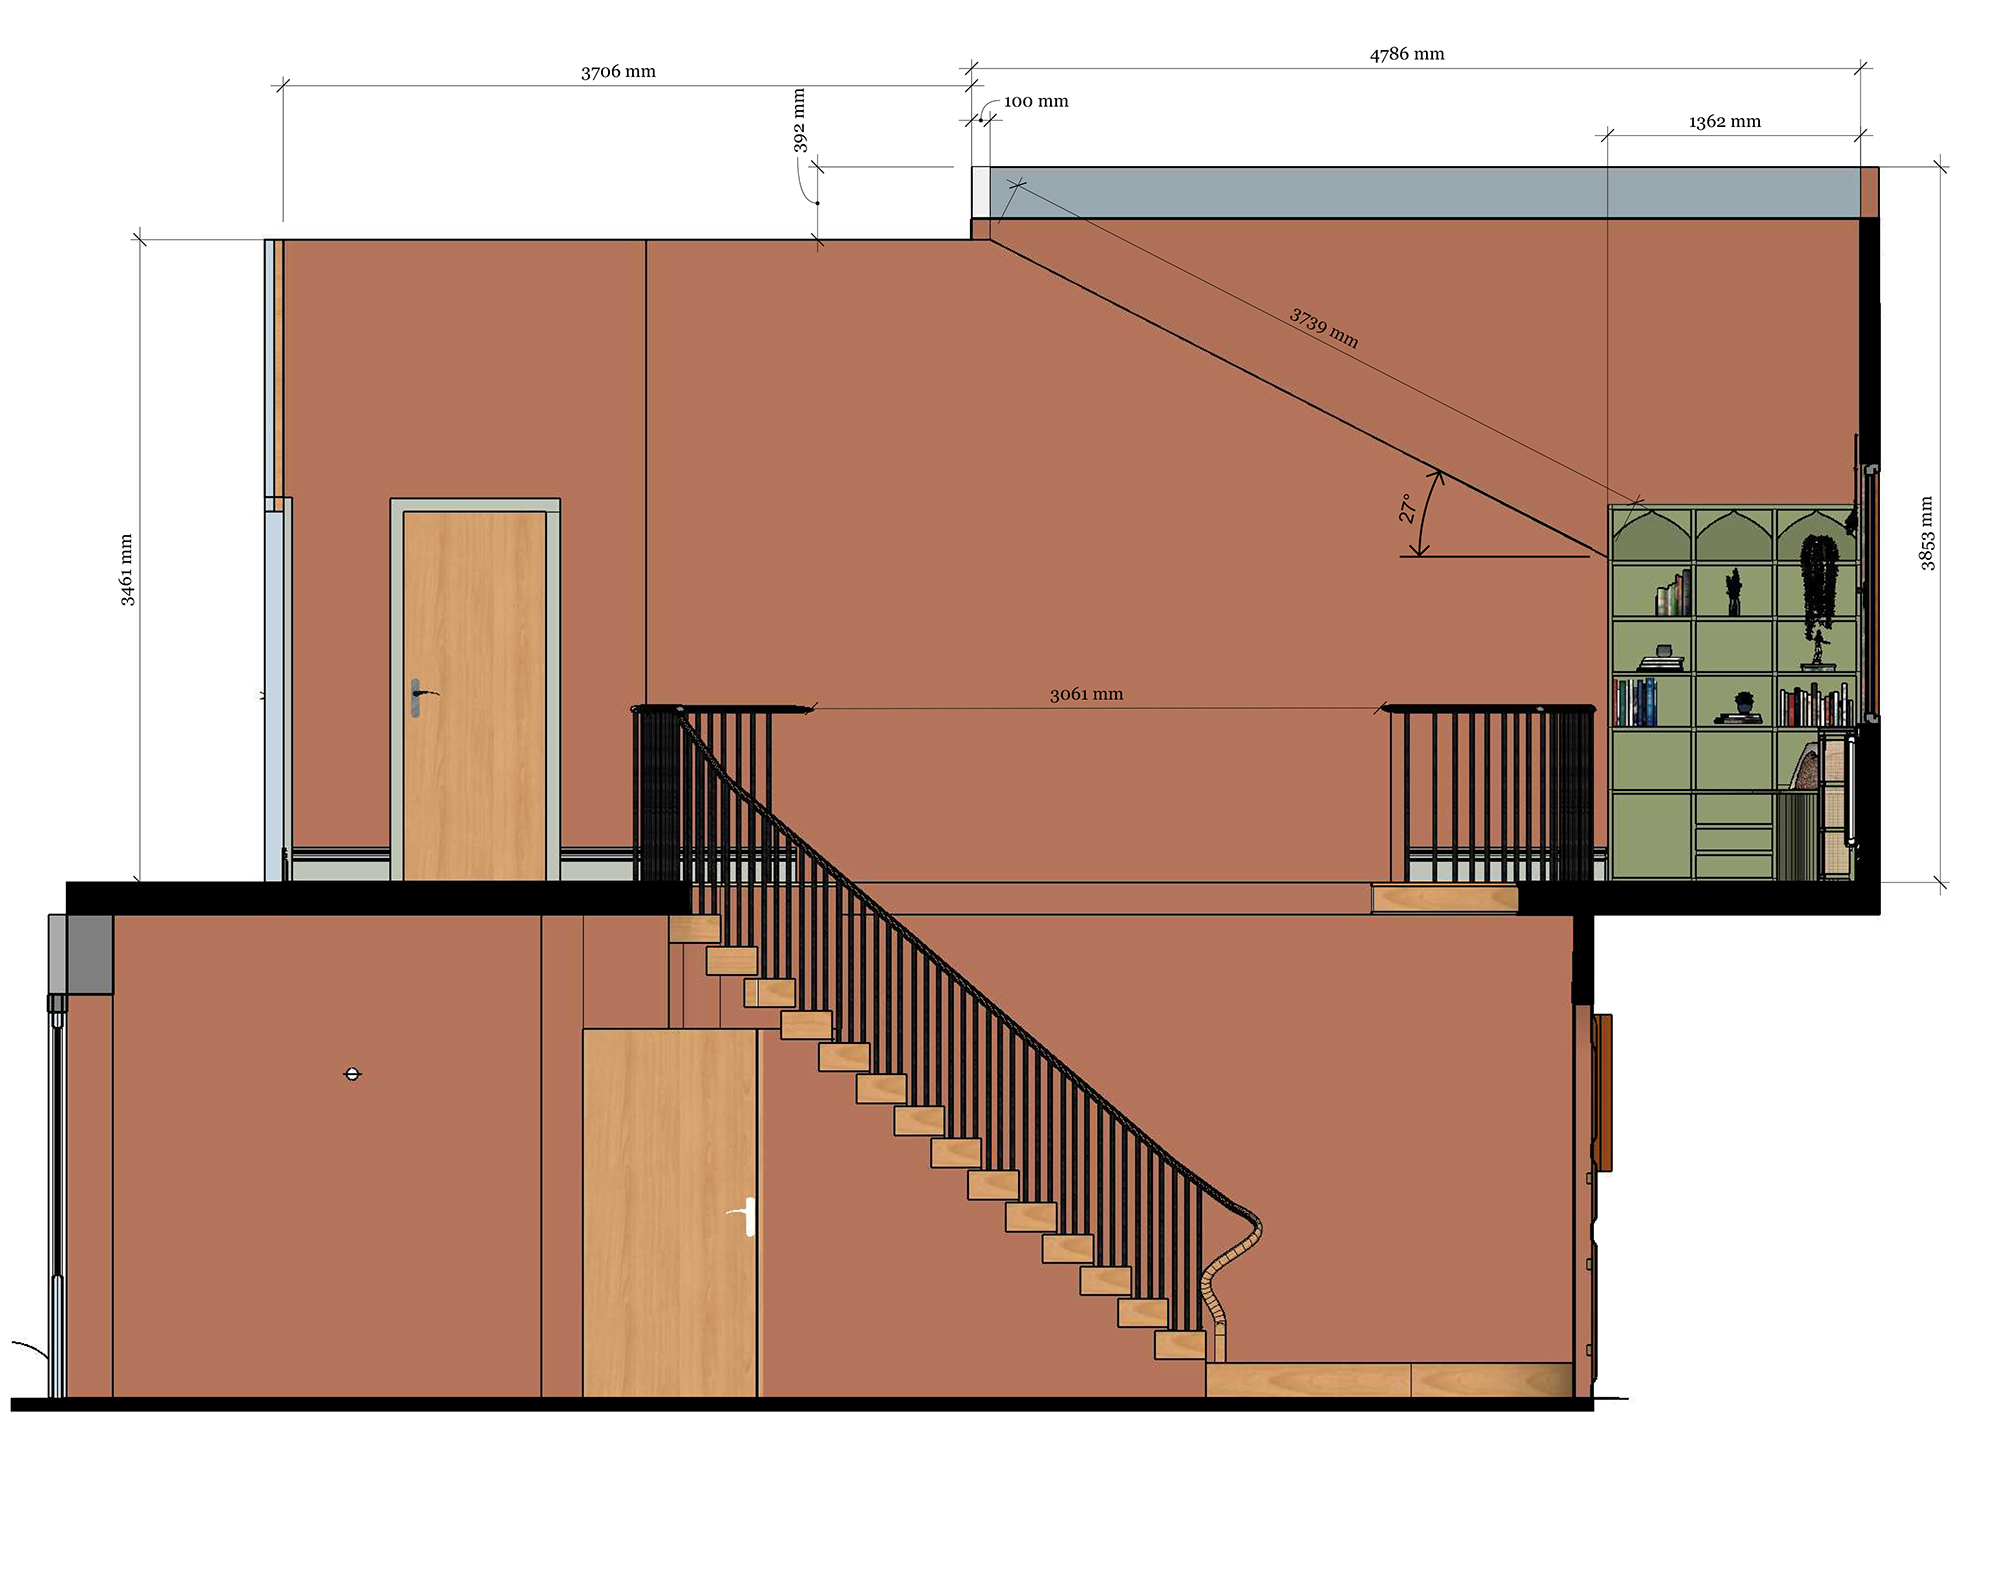 A section drawing of the hallway with dimensions.